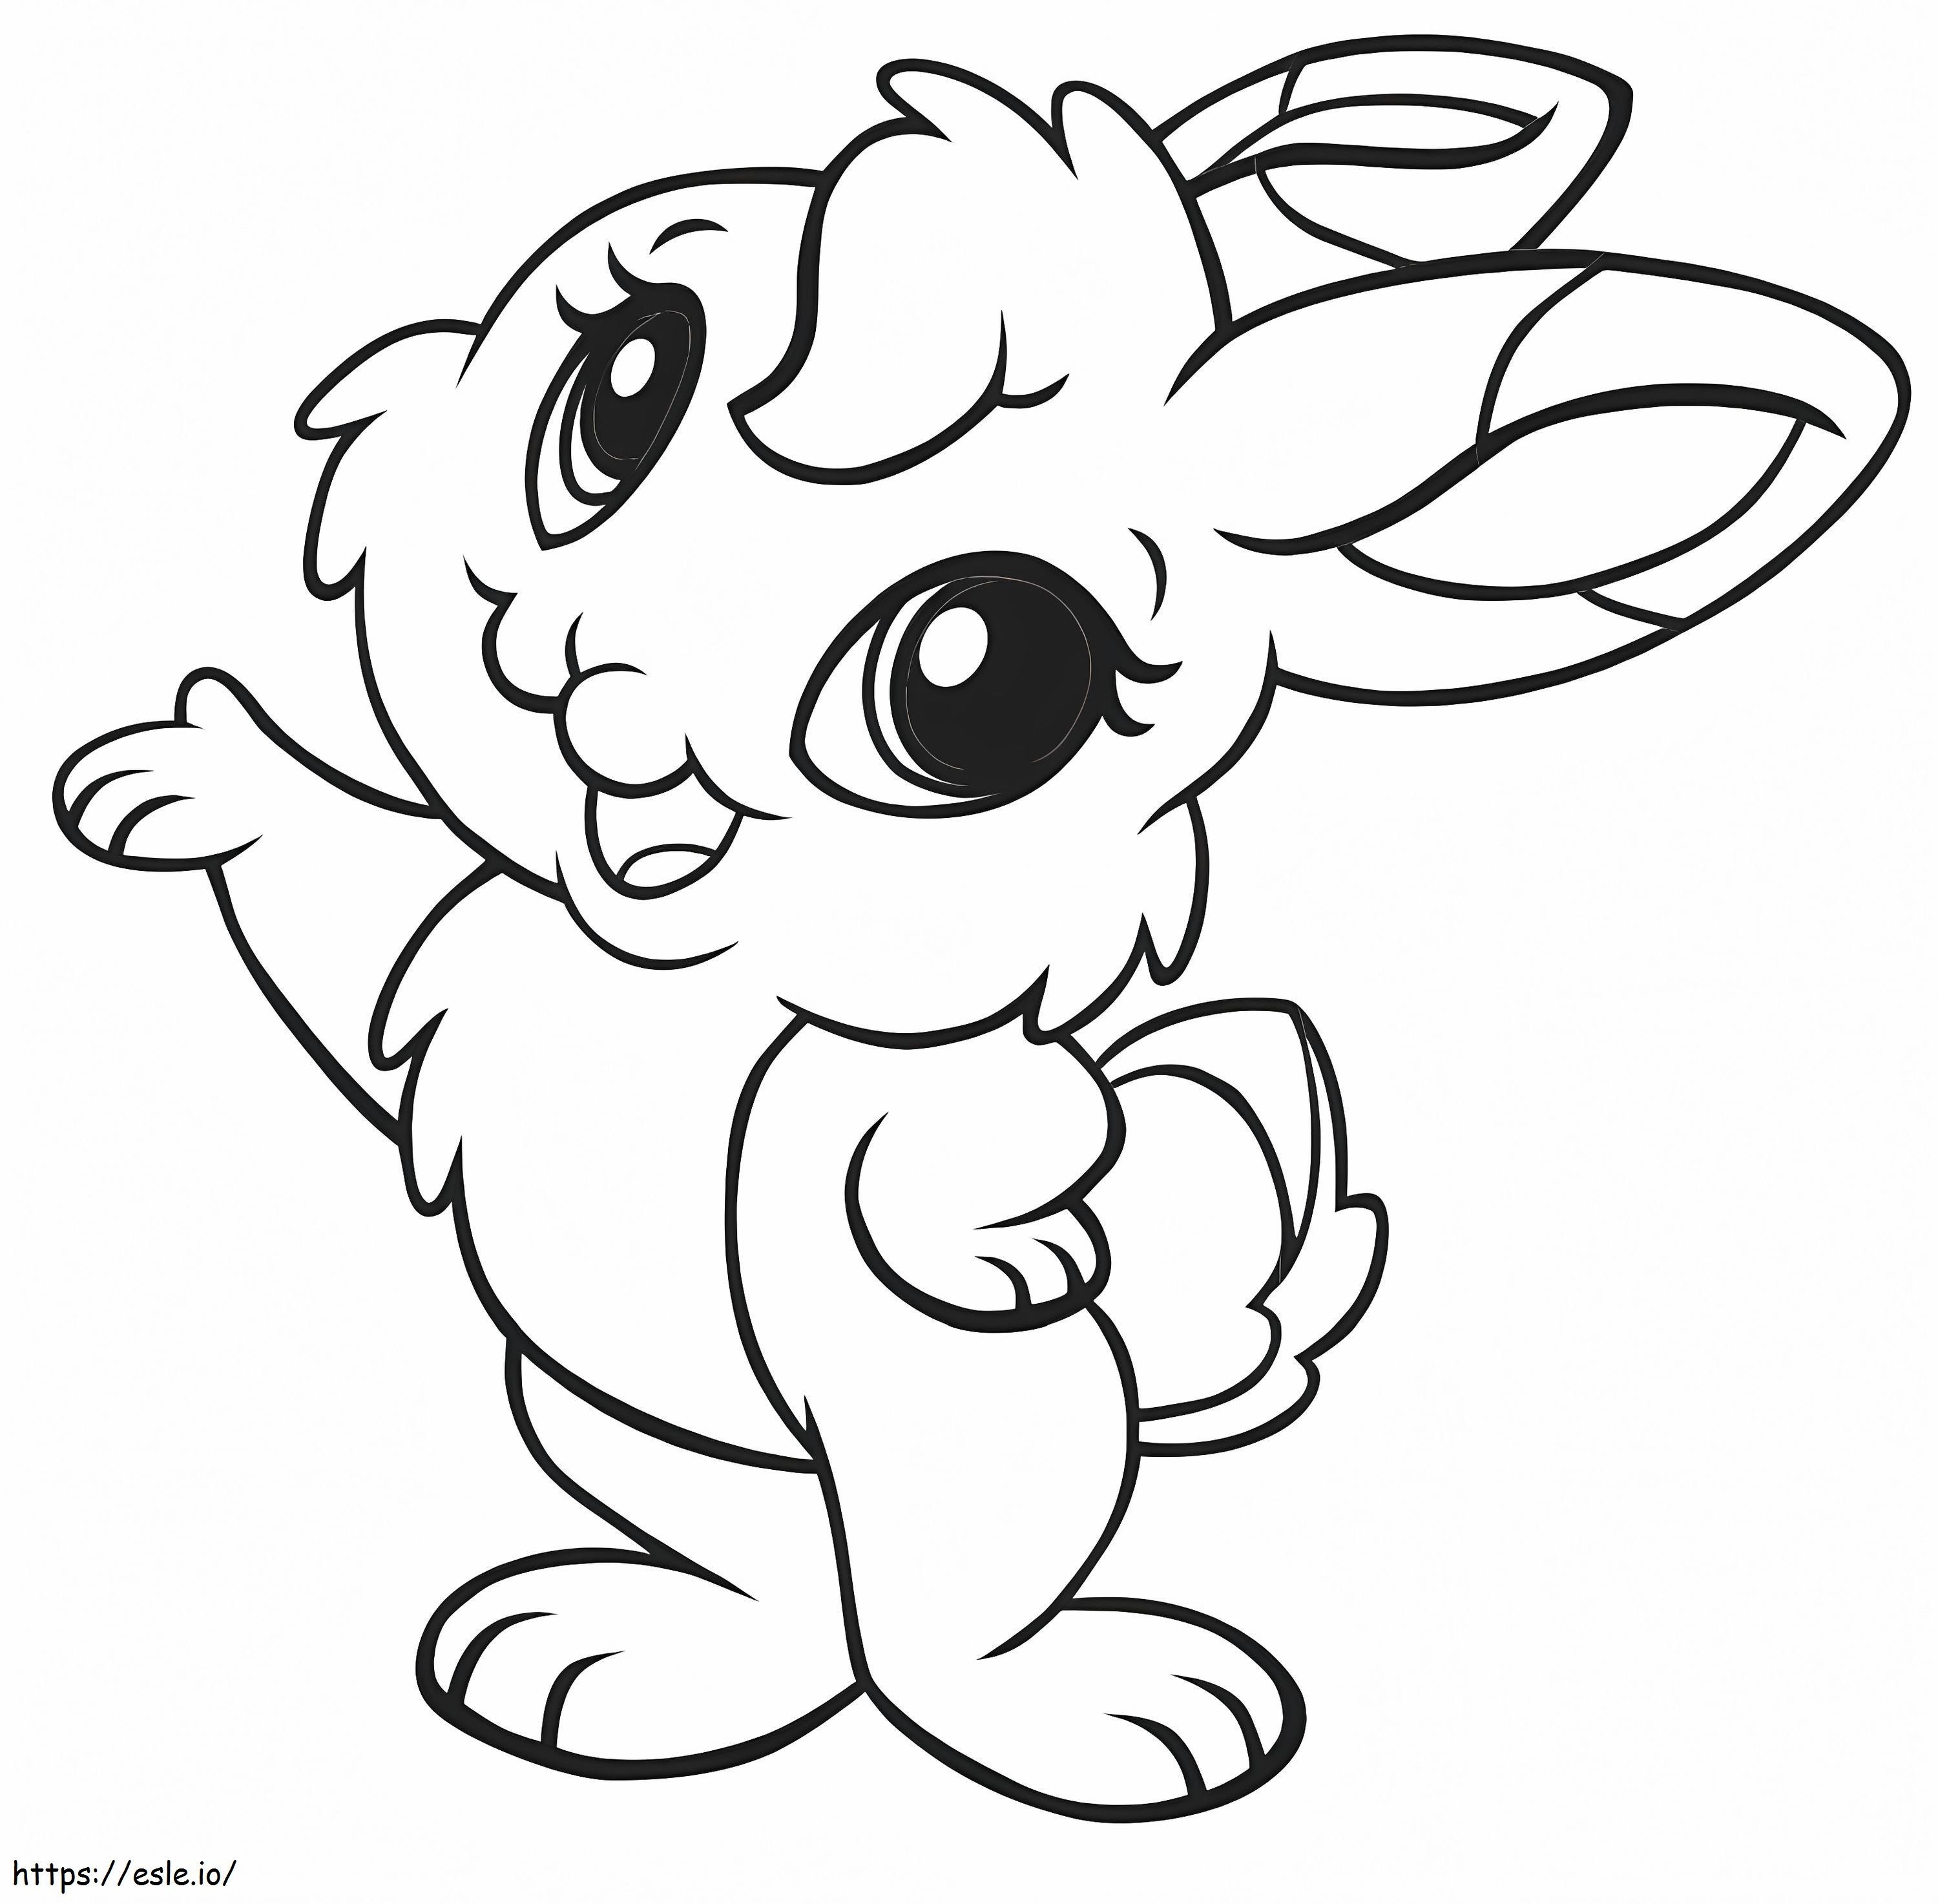 Rabbit A4 coloring page